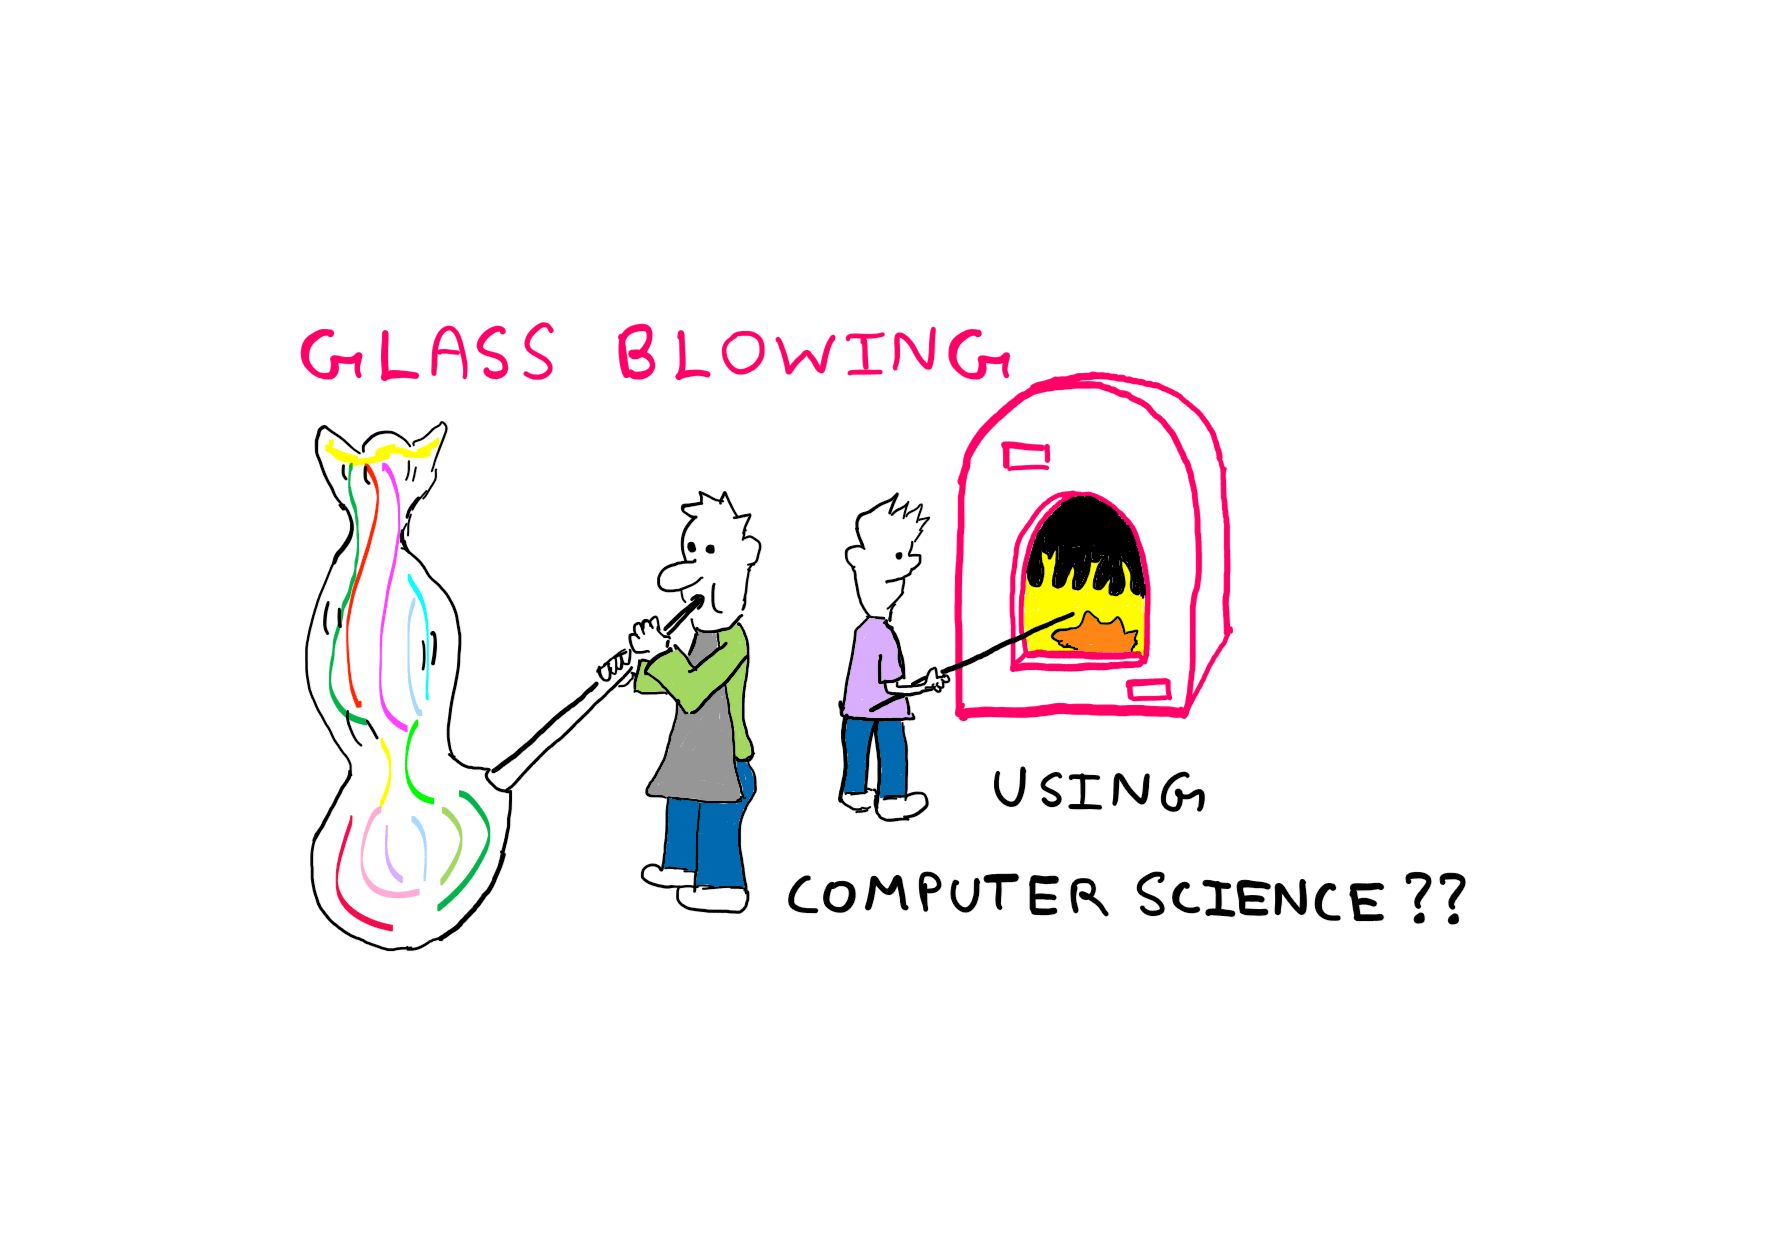 How To Benefit From Computer Science In Real Life? (I) - An illustration featuring one person heating glass in a flaming furnace, whereas another person is blowing and shaping a curvy-looking piece of glass artwork. Along with the illustration, the following text is presented: "Glass Blowing Using Computer Science?"